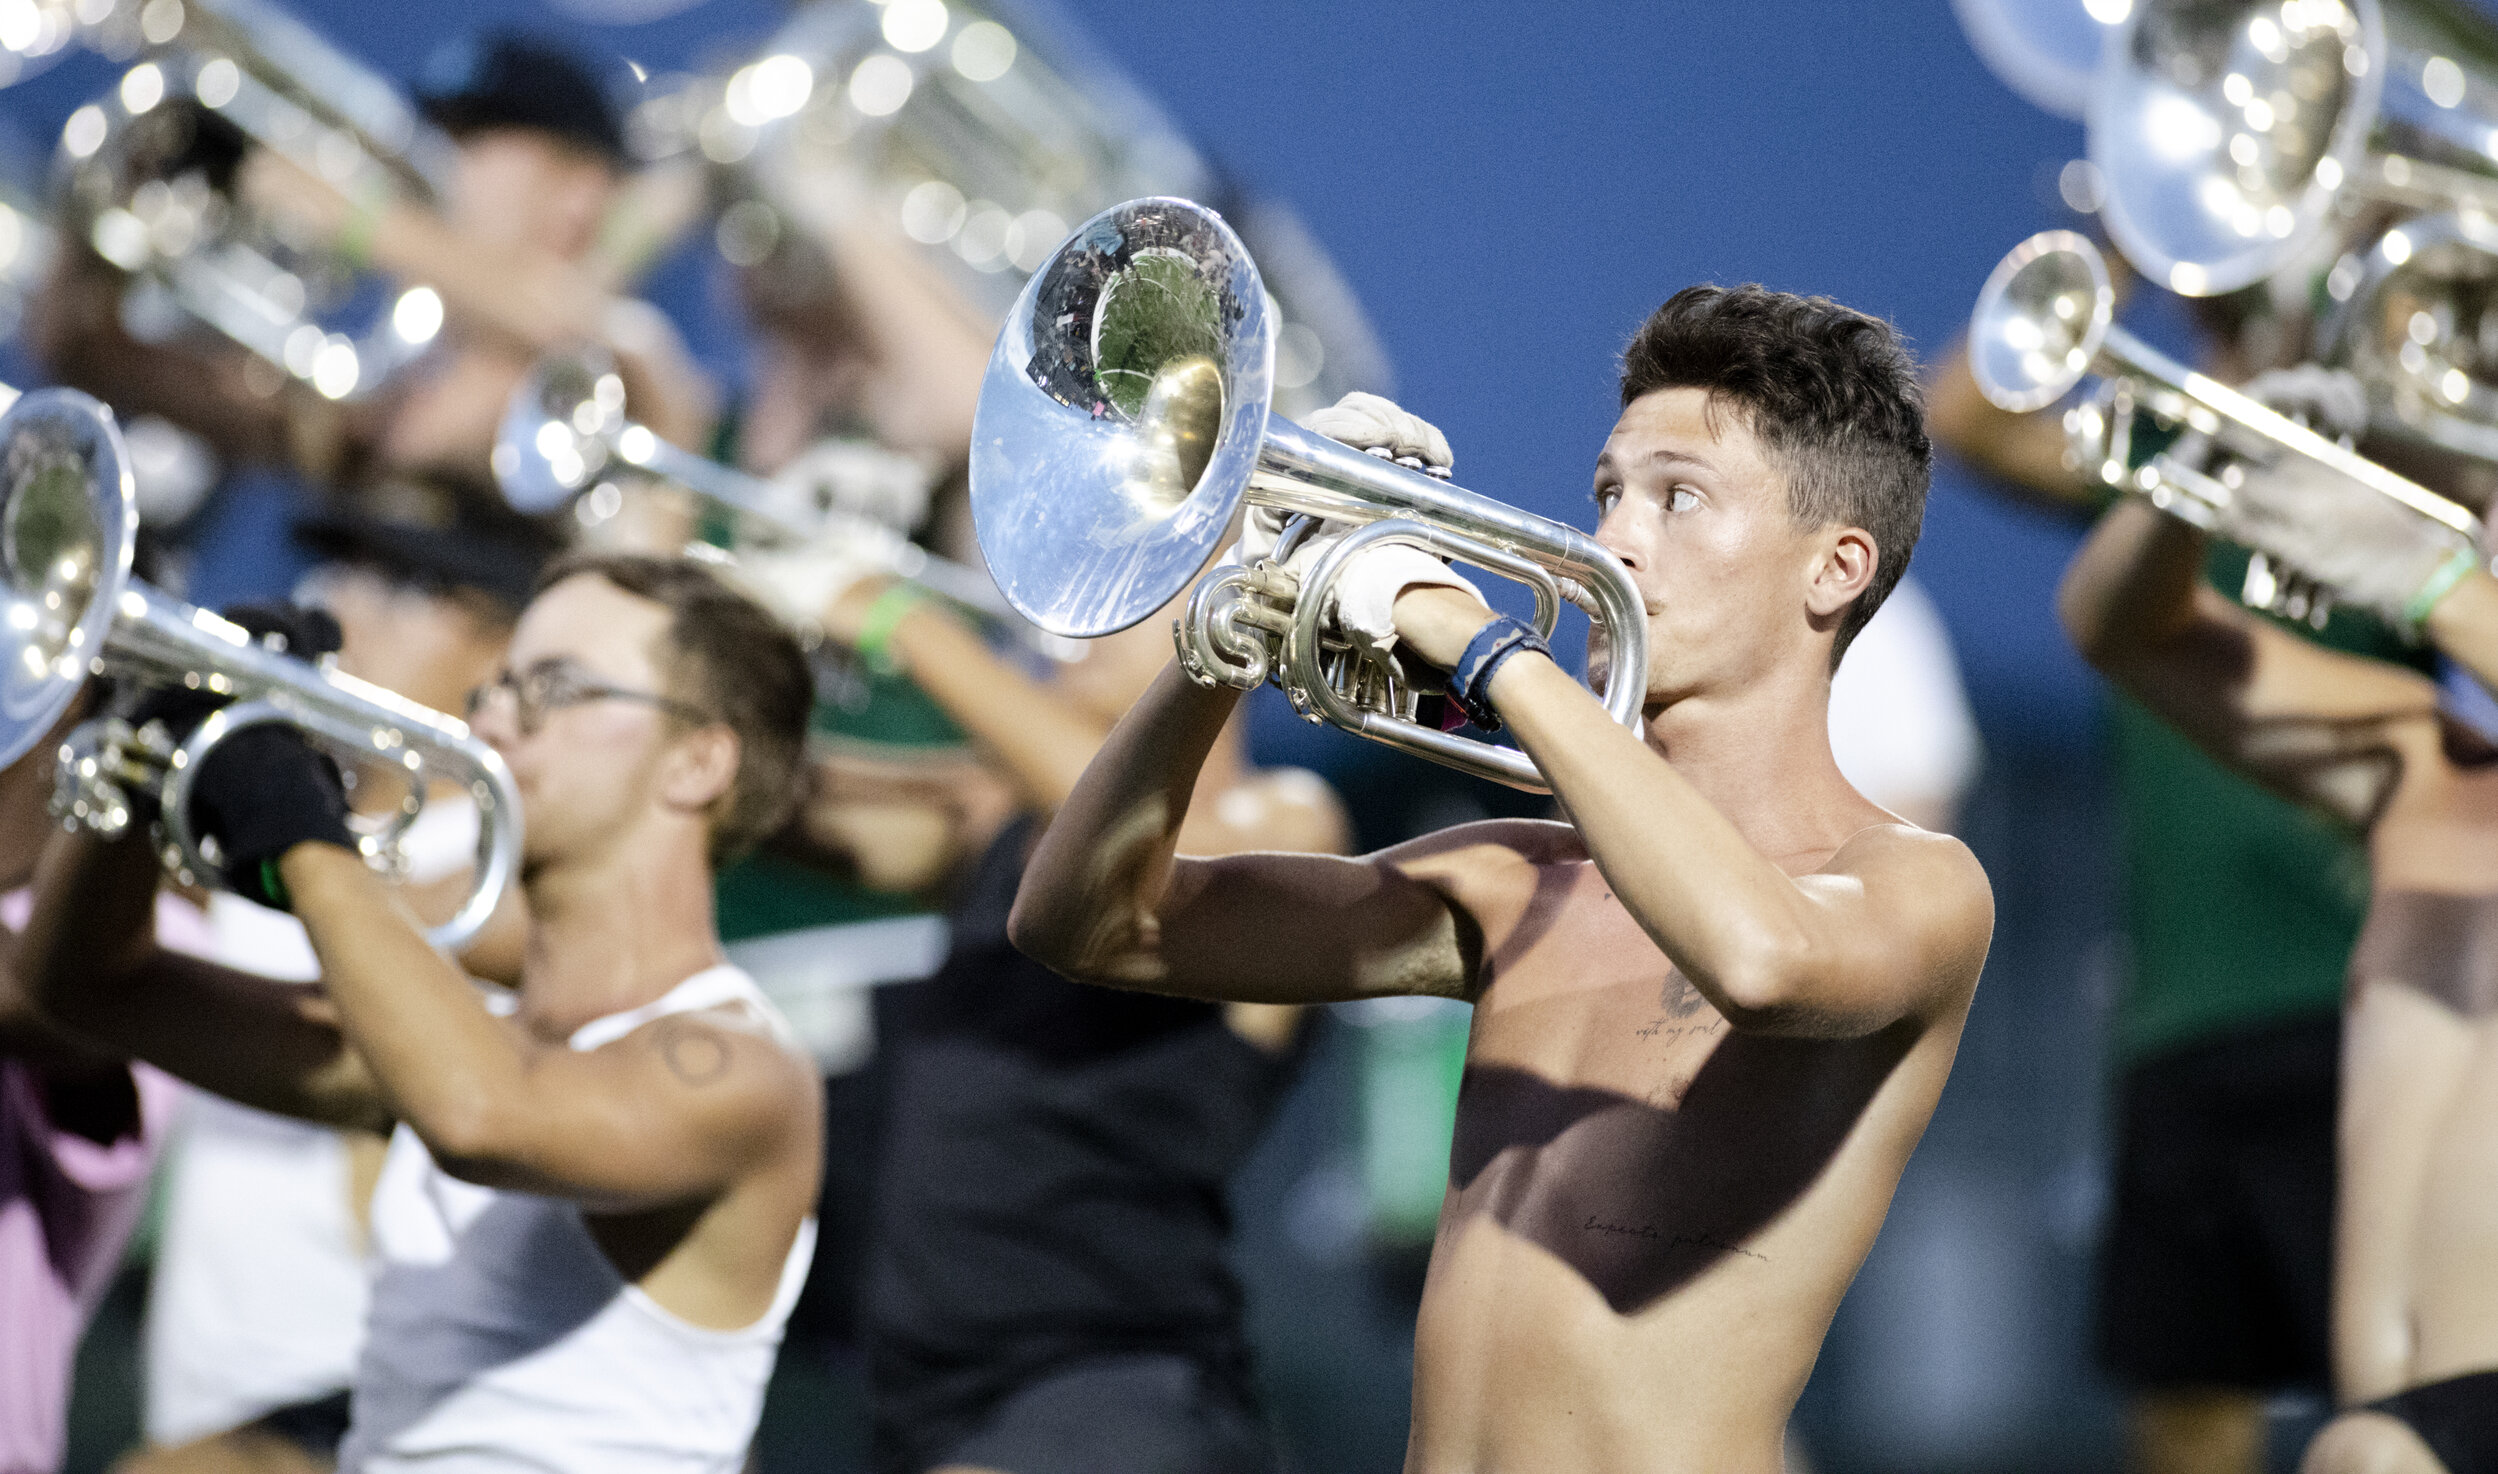 Cavaliers bring drum corps competition to Lisle